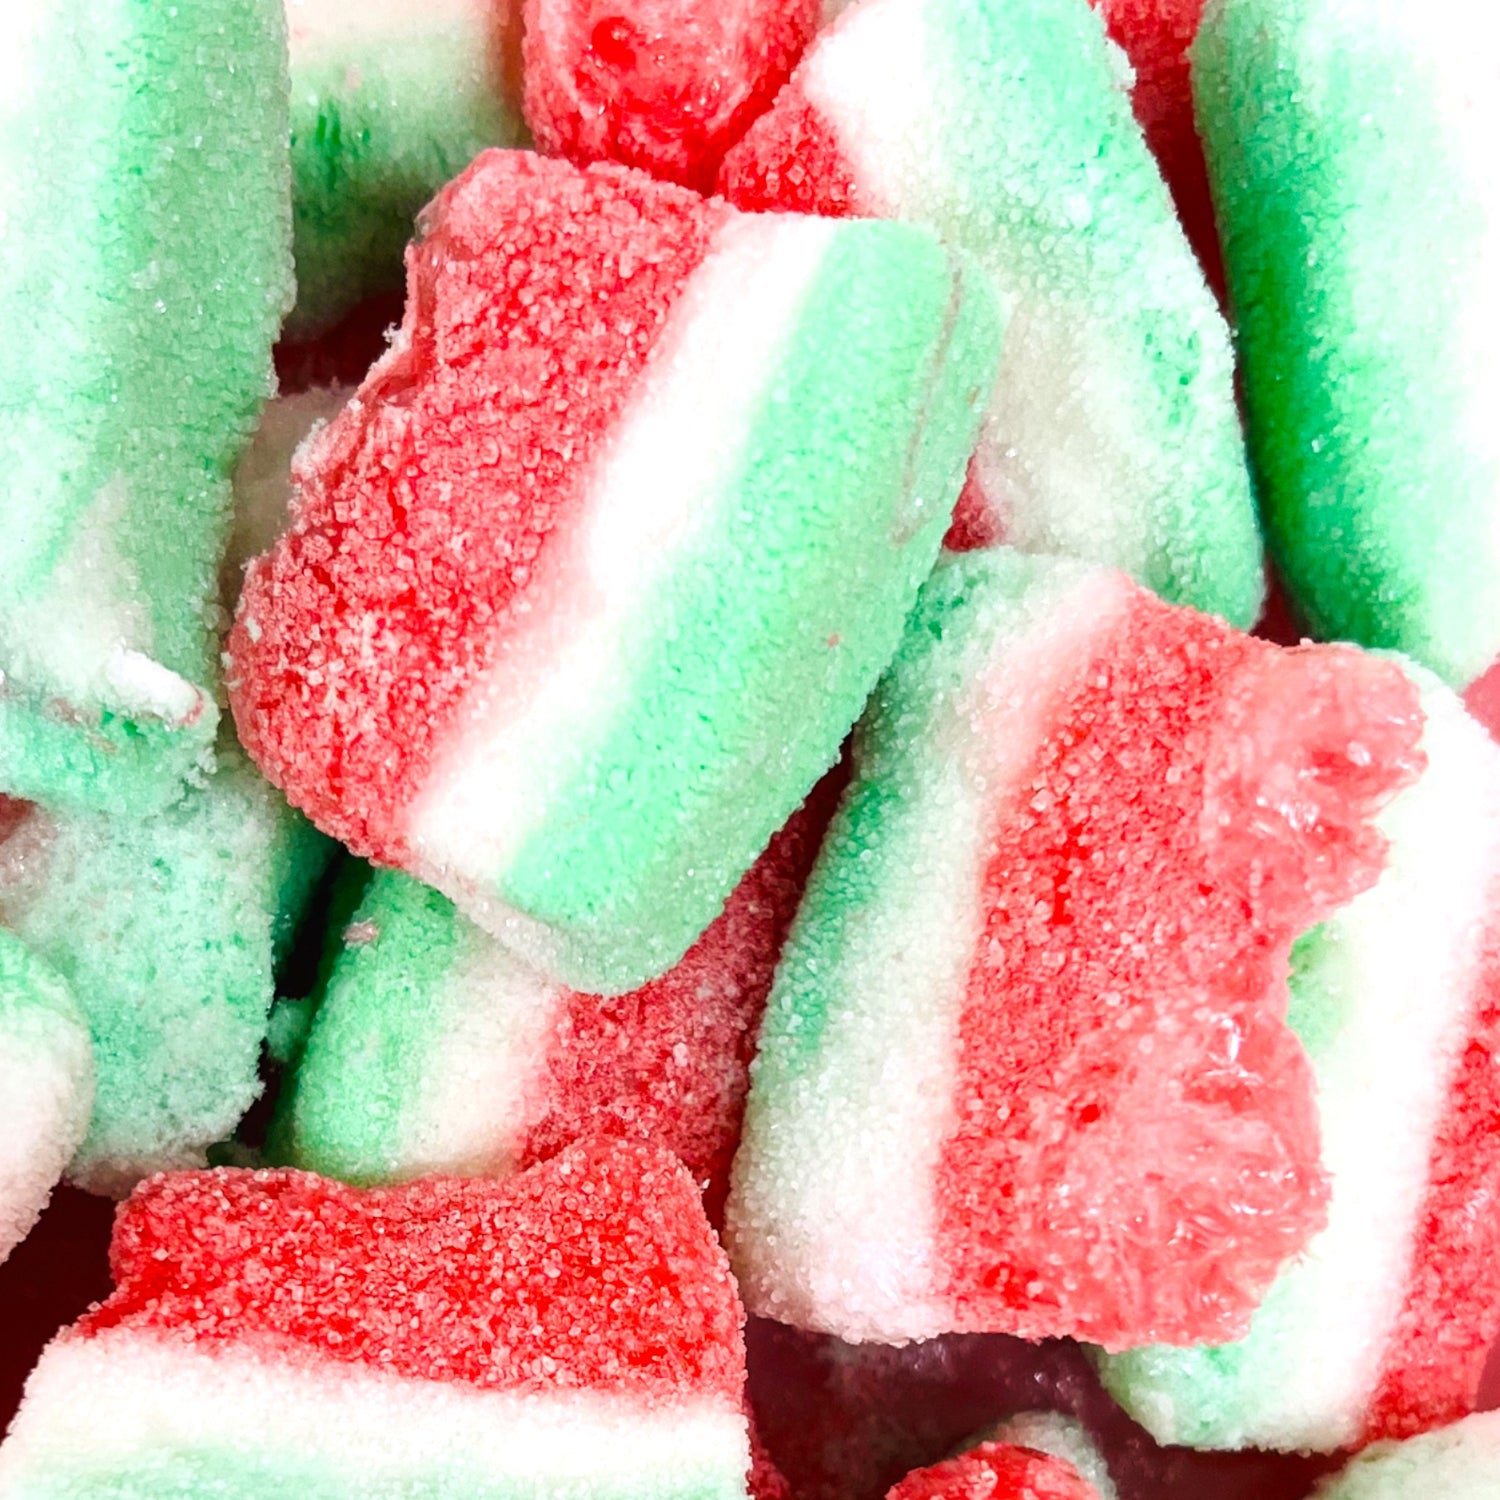 Watermelon Slices Freeze Dried Sweets (Halal)